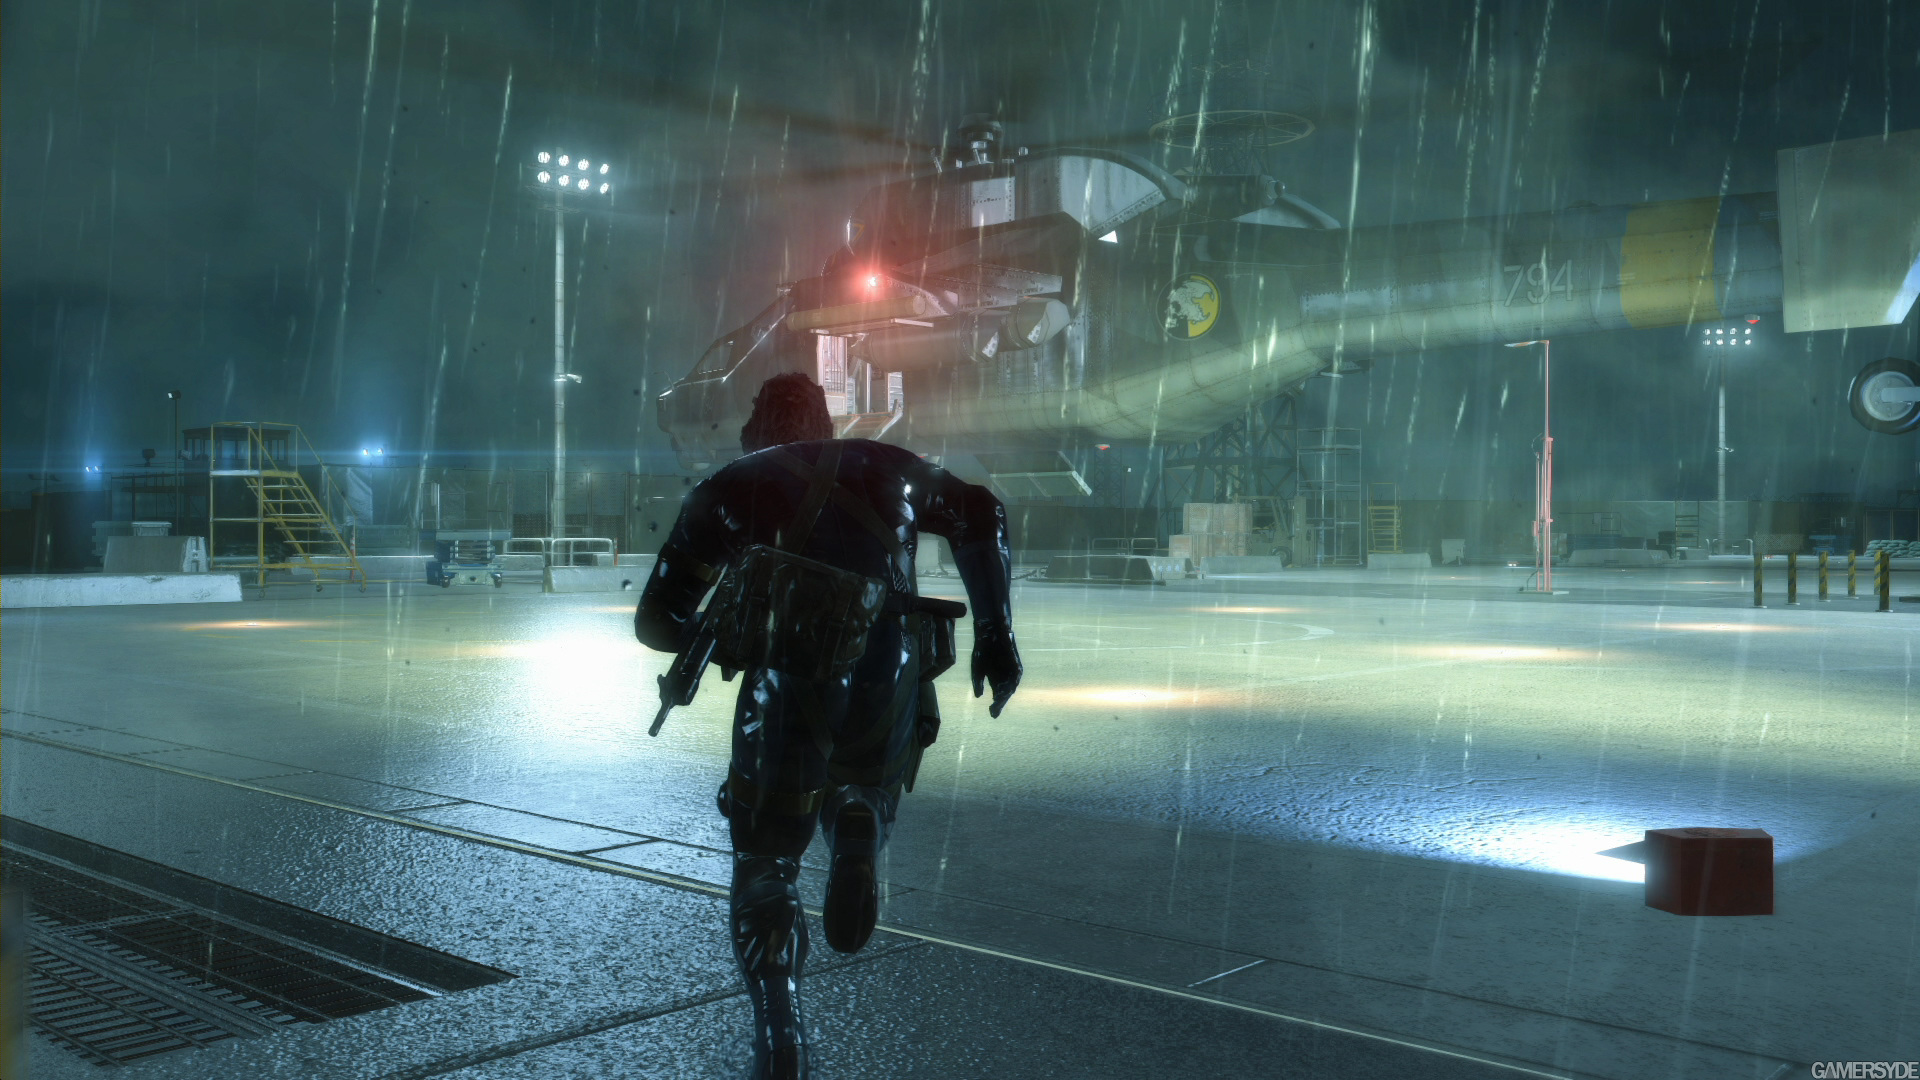 image_metal_gear_solid_v_ground_zeroes-23638-2849_0010.jpg